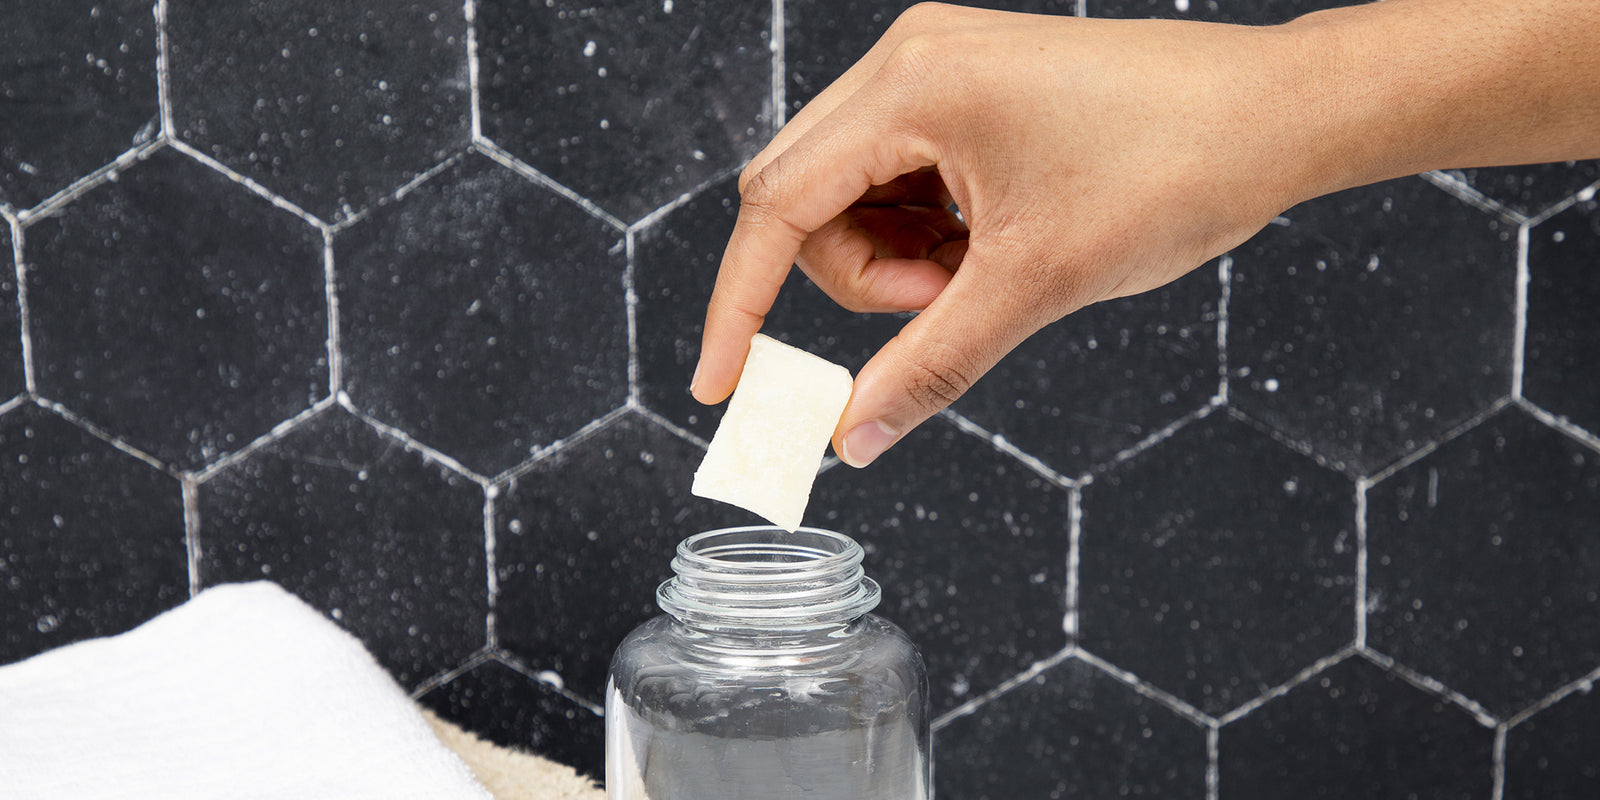 A hand placing a solid soap tablet in an open container.